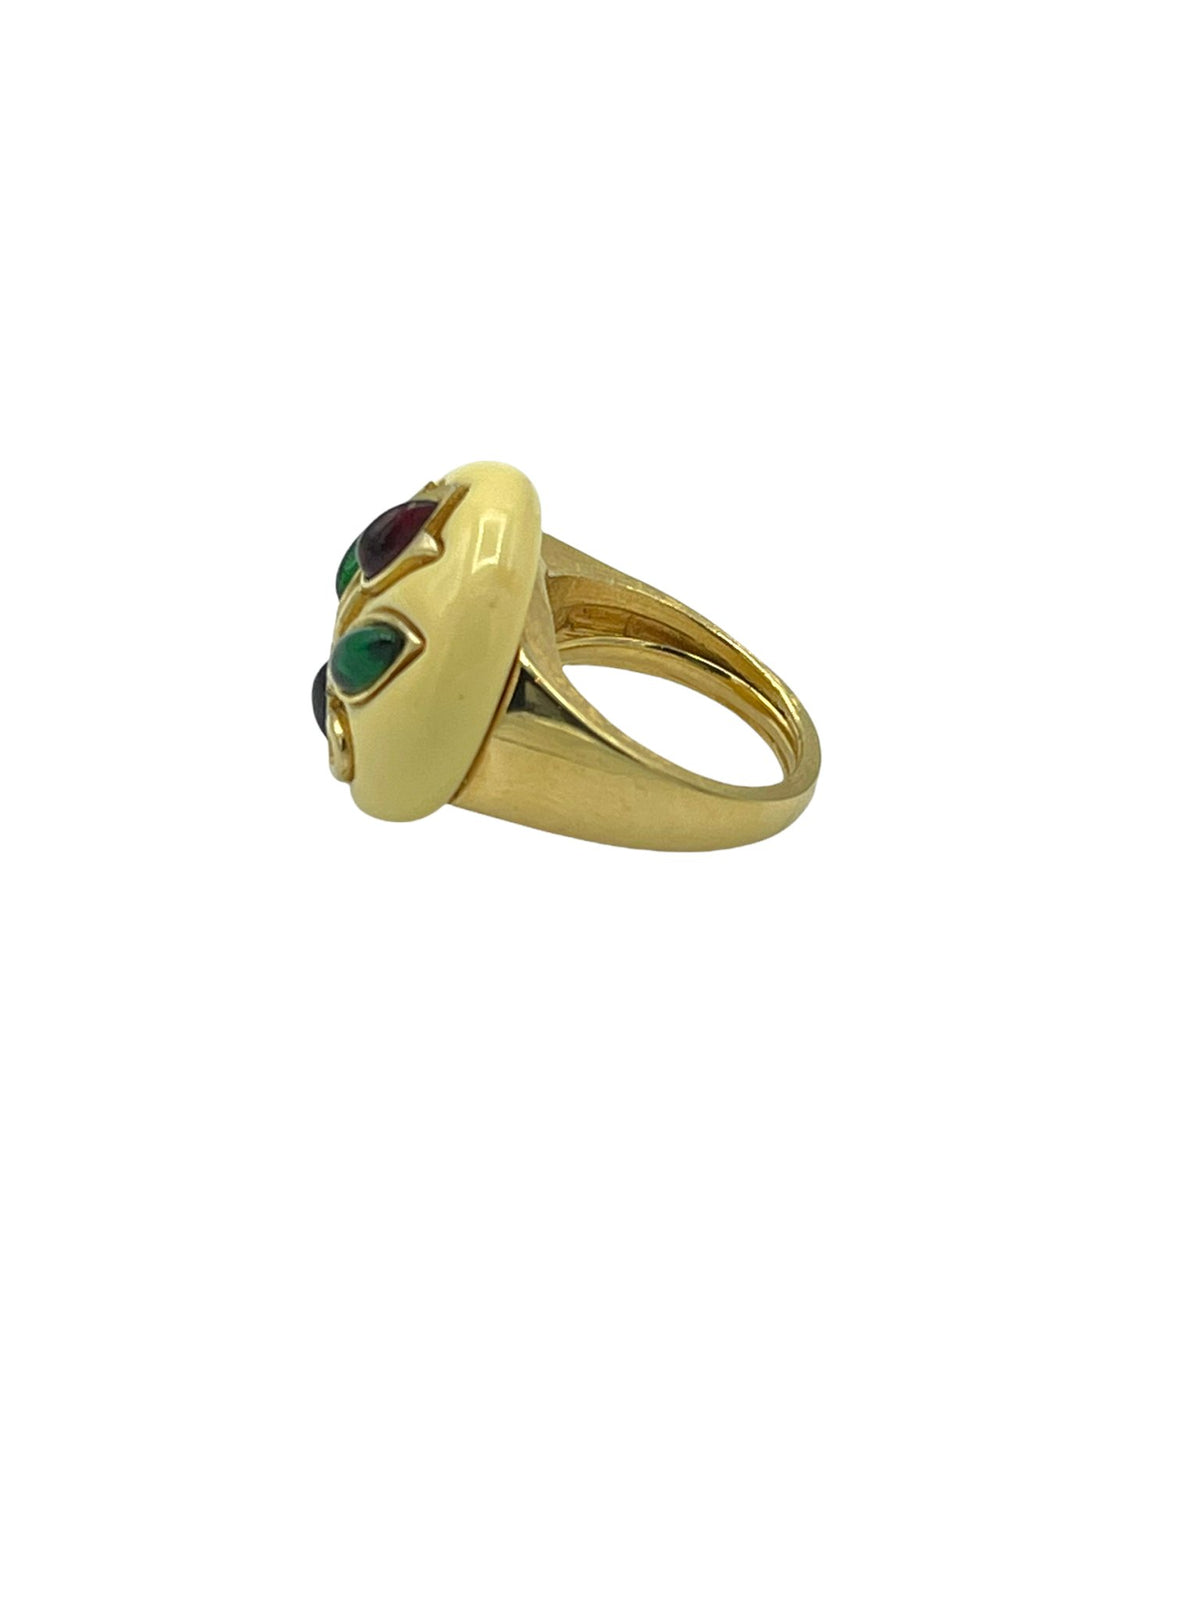 Trifari Persian Garden Cocktail Ring - 24 Wishes Vintage Jewelry